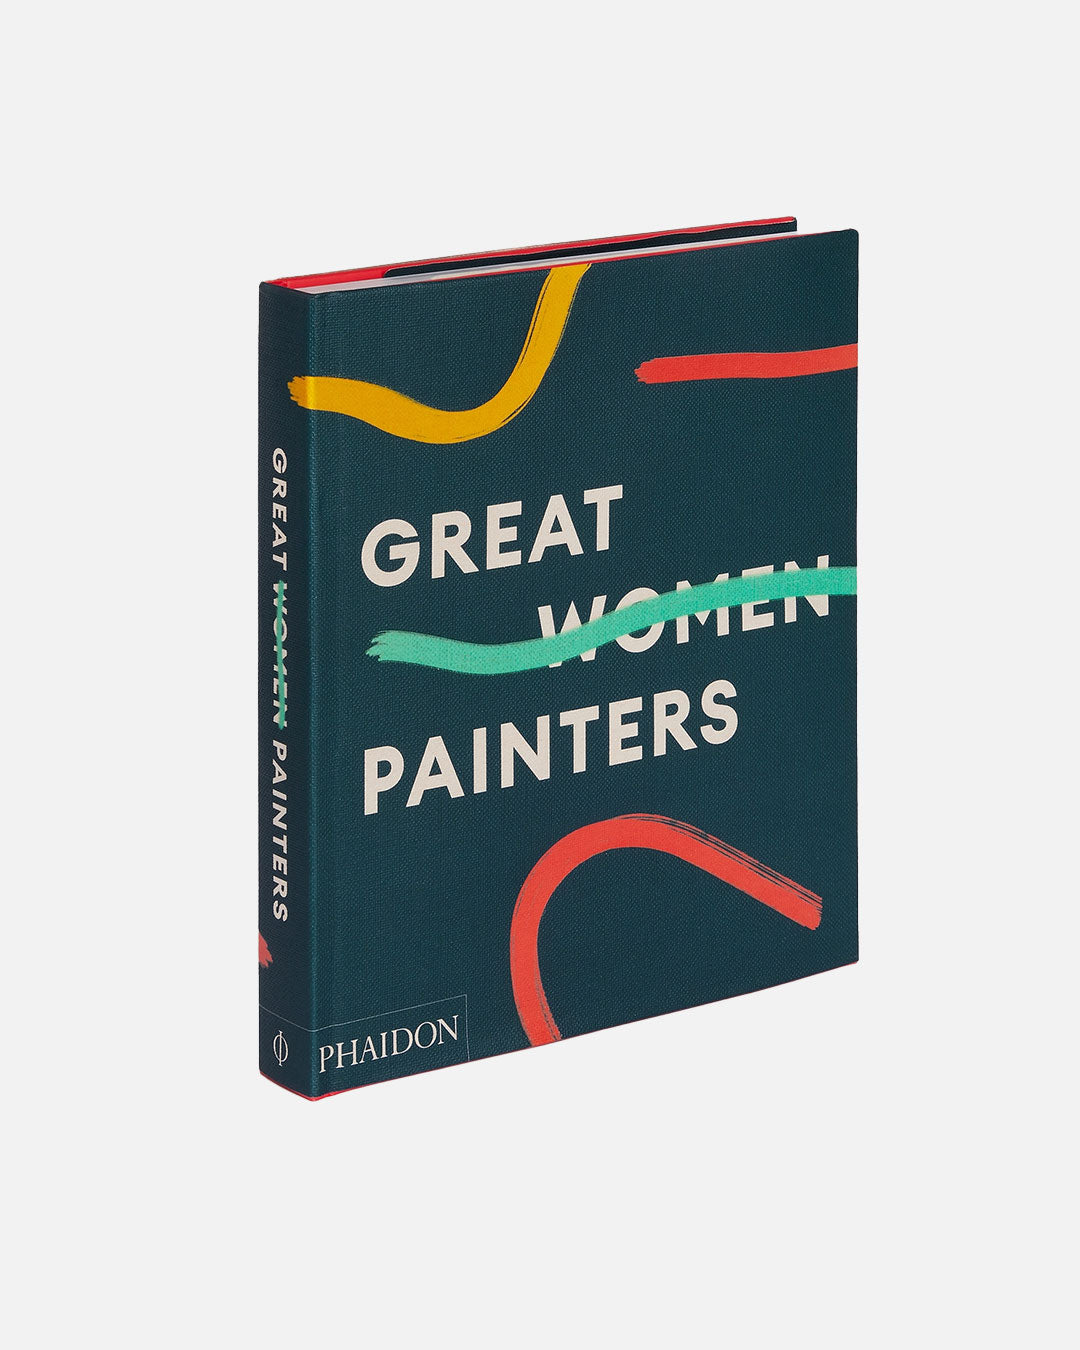 Great Women Painters by Phaidon Editors and Alison M. Gingeras